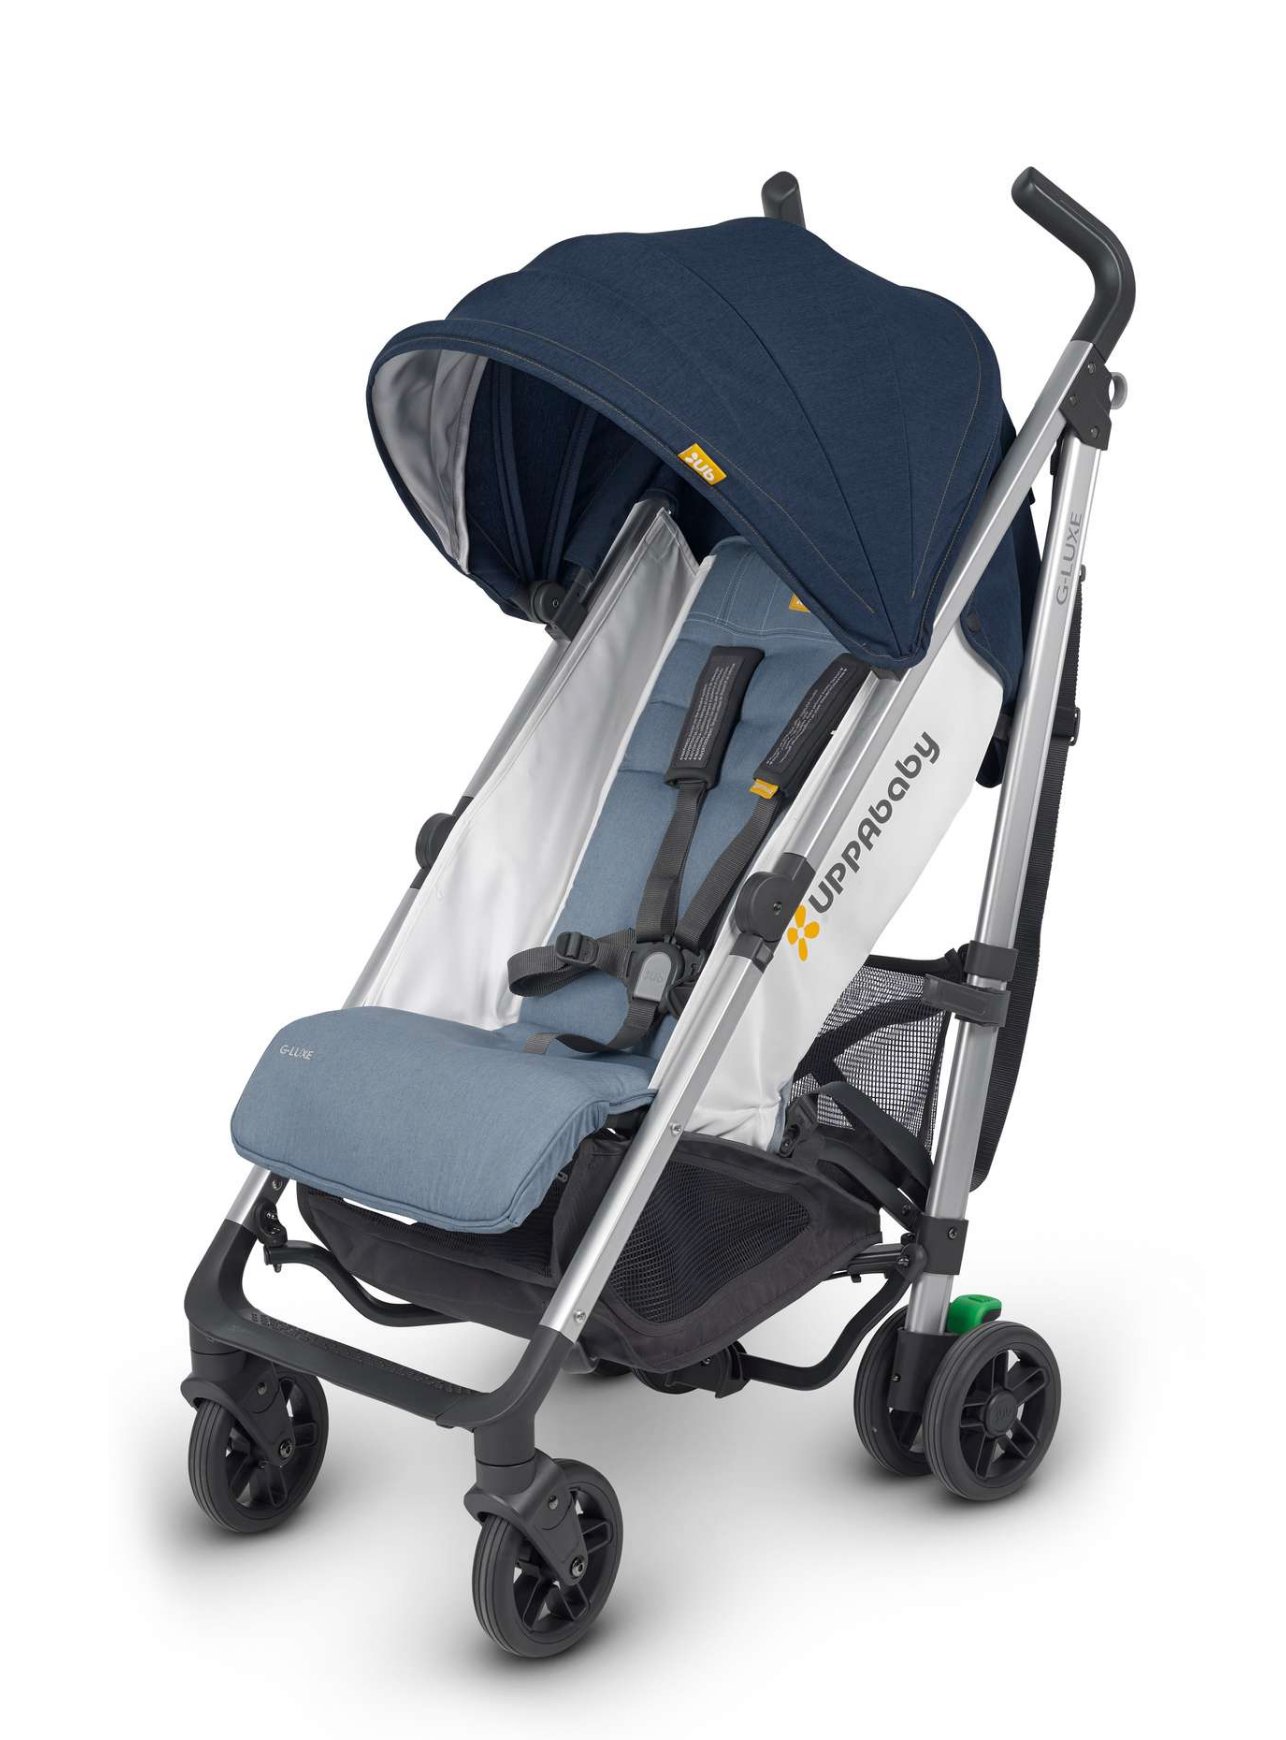 UPPAbaby GLUXE Stroller